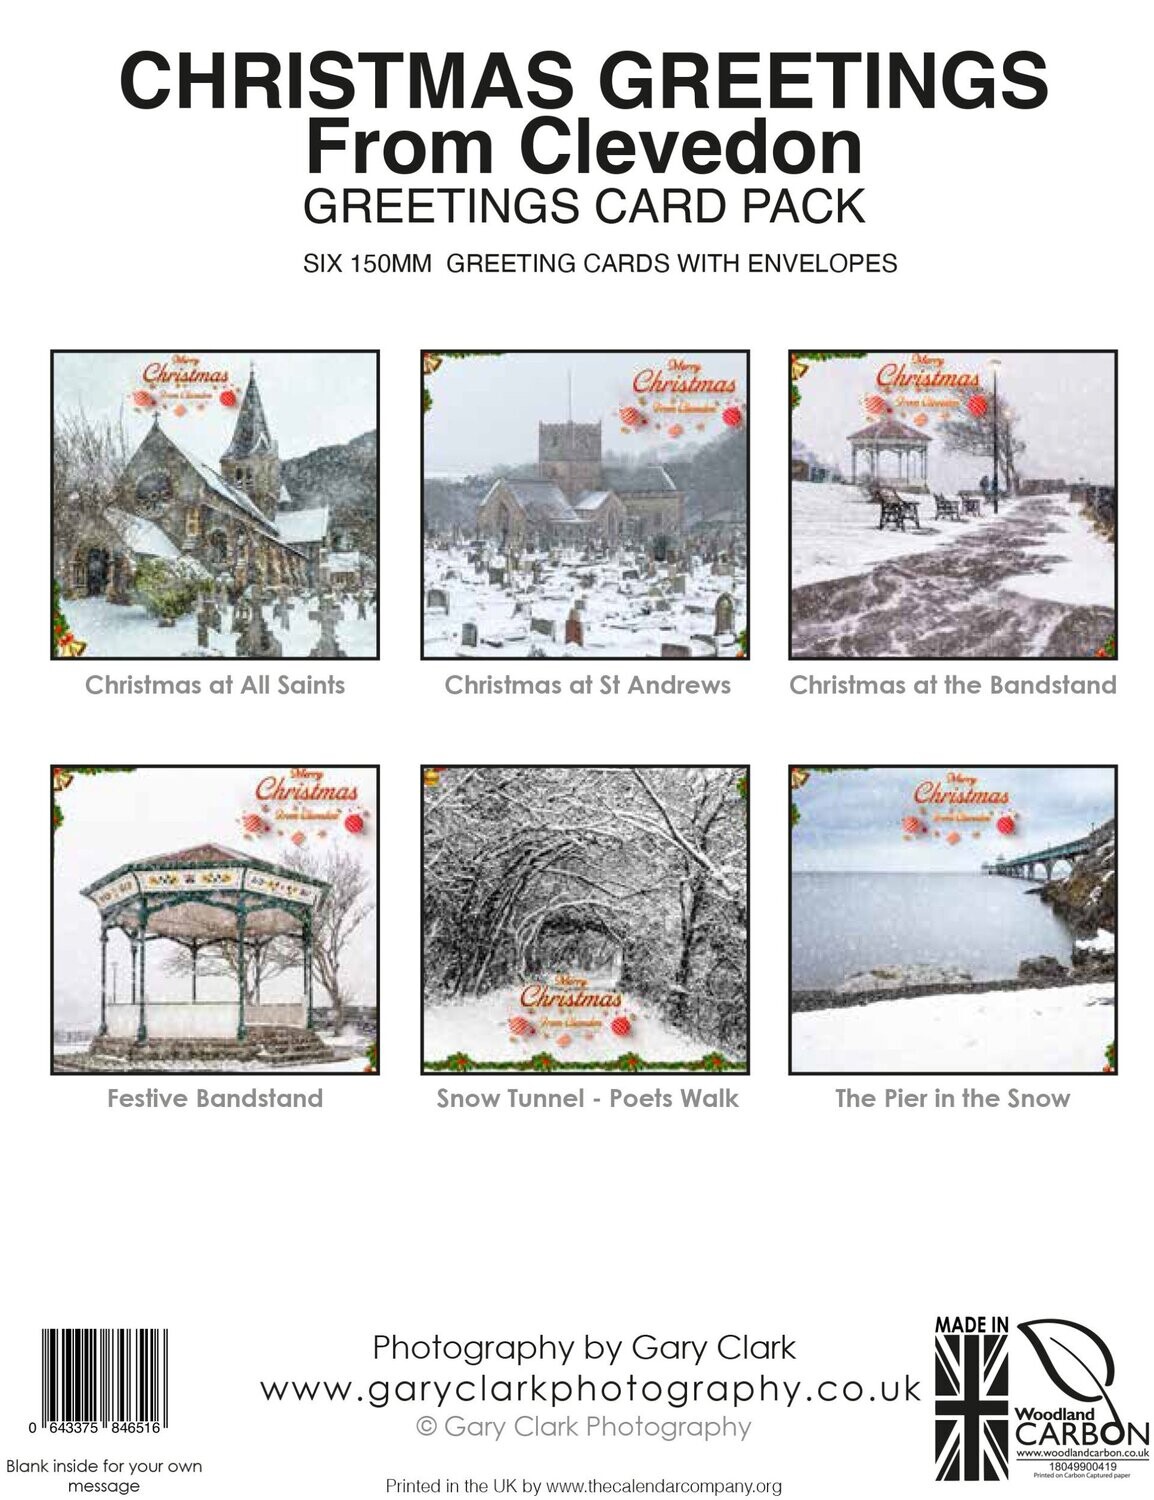 Christmas Greetings from Clevedon - Six 150mm x 150mm Greeting Cards with Envelopes supplied in a Greeting card pack (FREE UK DELIVERY)